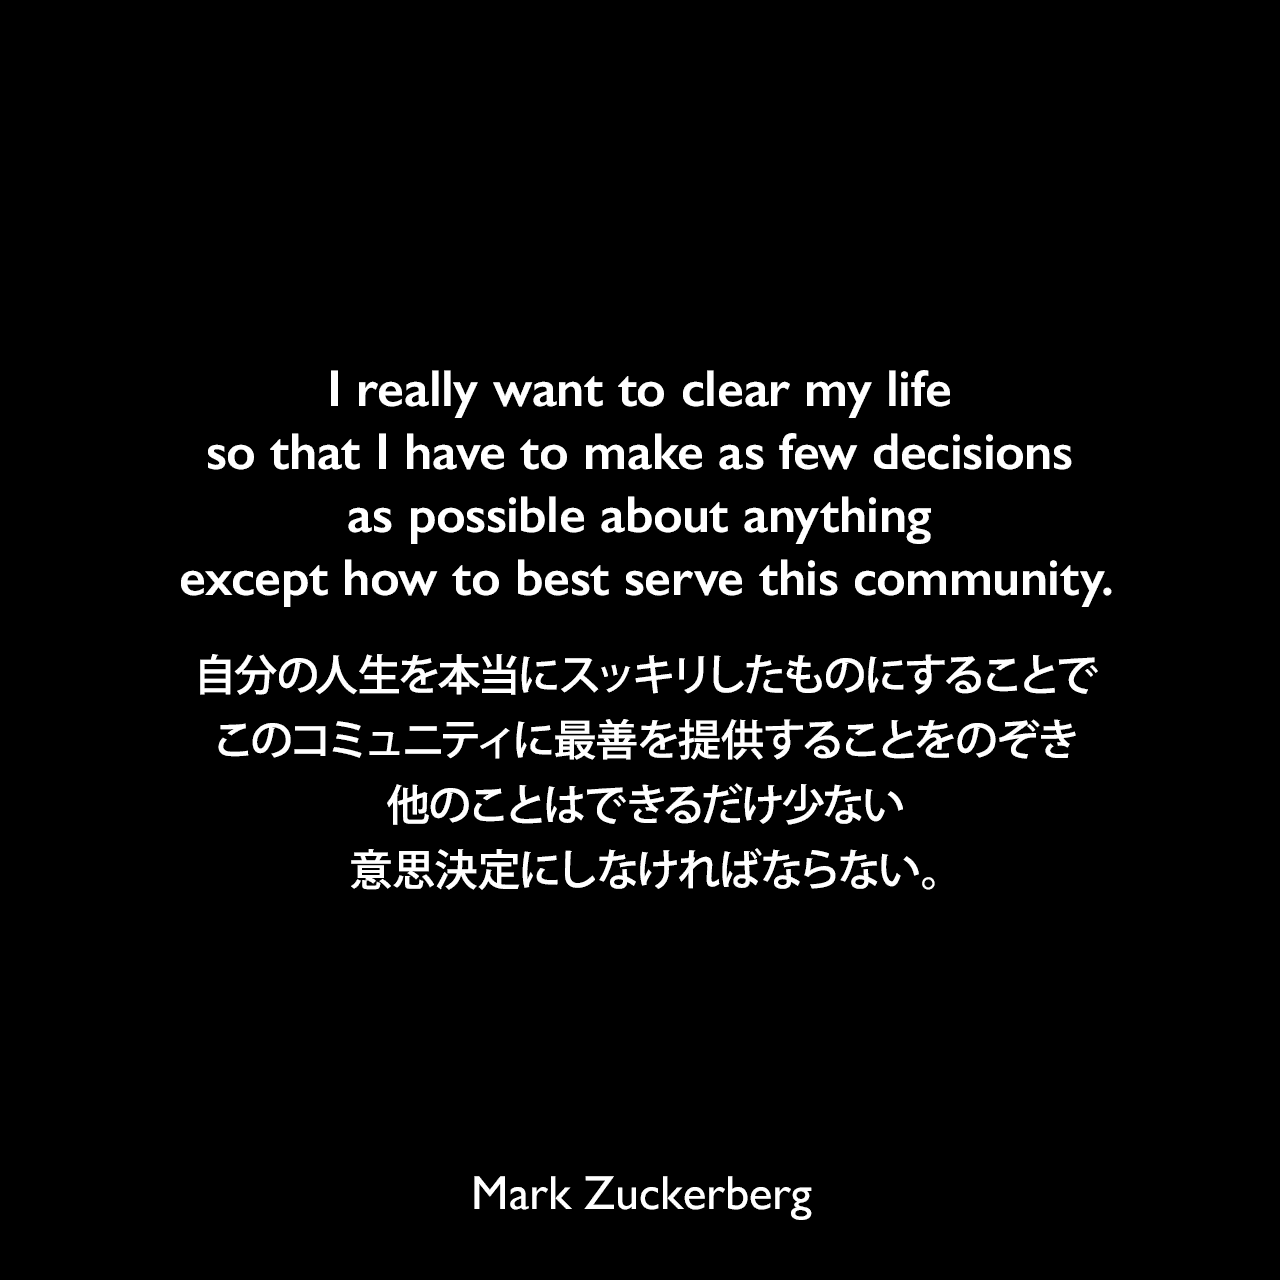 I really want to clear my life so that I have to make as few decisions as possible about anything except how to best serve this community.自分の人生を本当にスッキリしたものにすることで、このコミュニティに最善を提供することをのぞき、他のことはできるだけ少ない意思決定にしなければならない。- 2014年11月 イギリスの新聞デイリー・テレグラフよりMark Zuckerberg